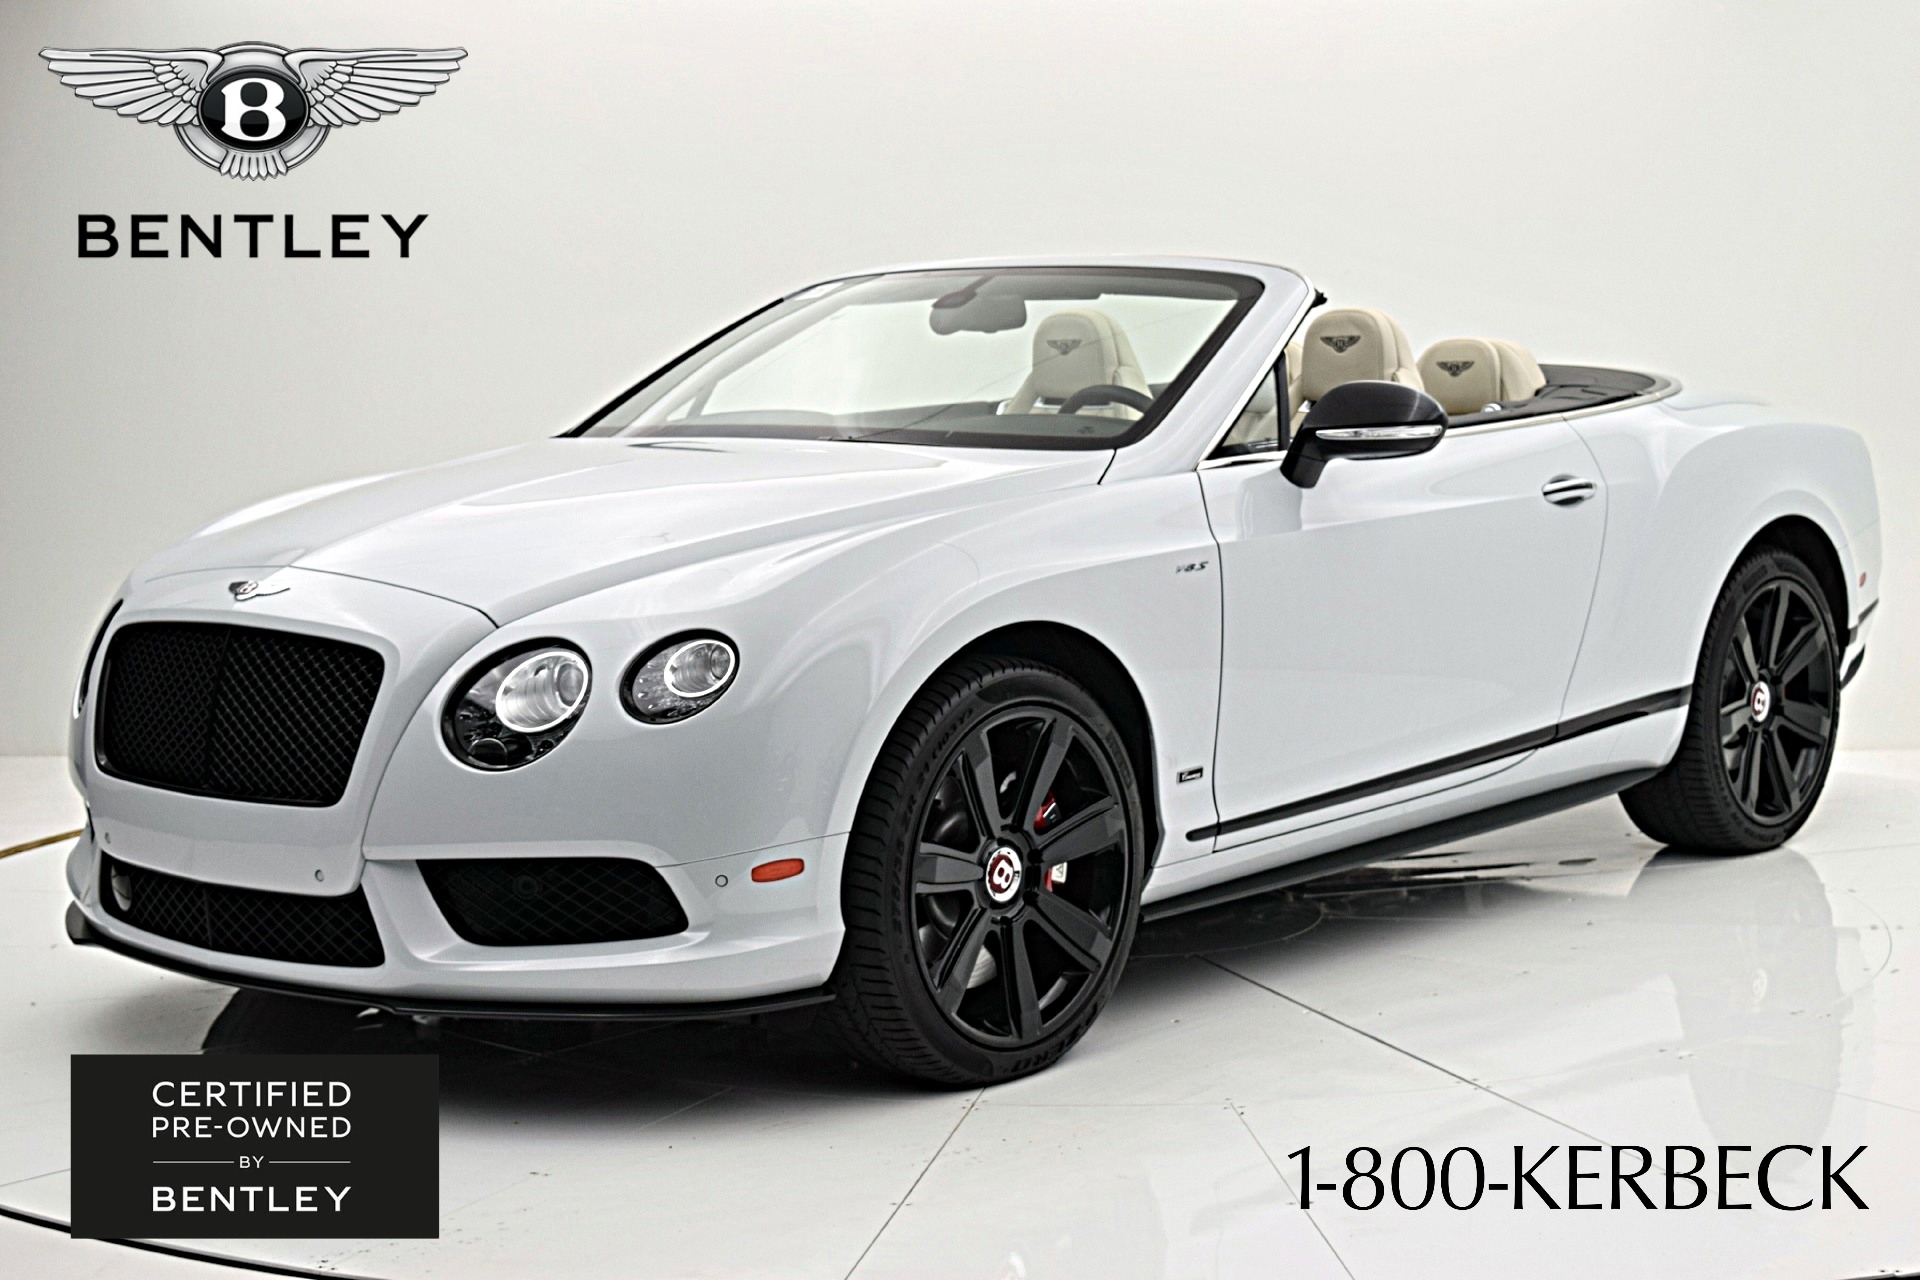 Used 2015 Bentley Continental GT V8 S for sale $149,000 at Bentley Palmyra N.J. in Palmyra NJ 08065 2